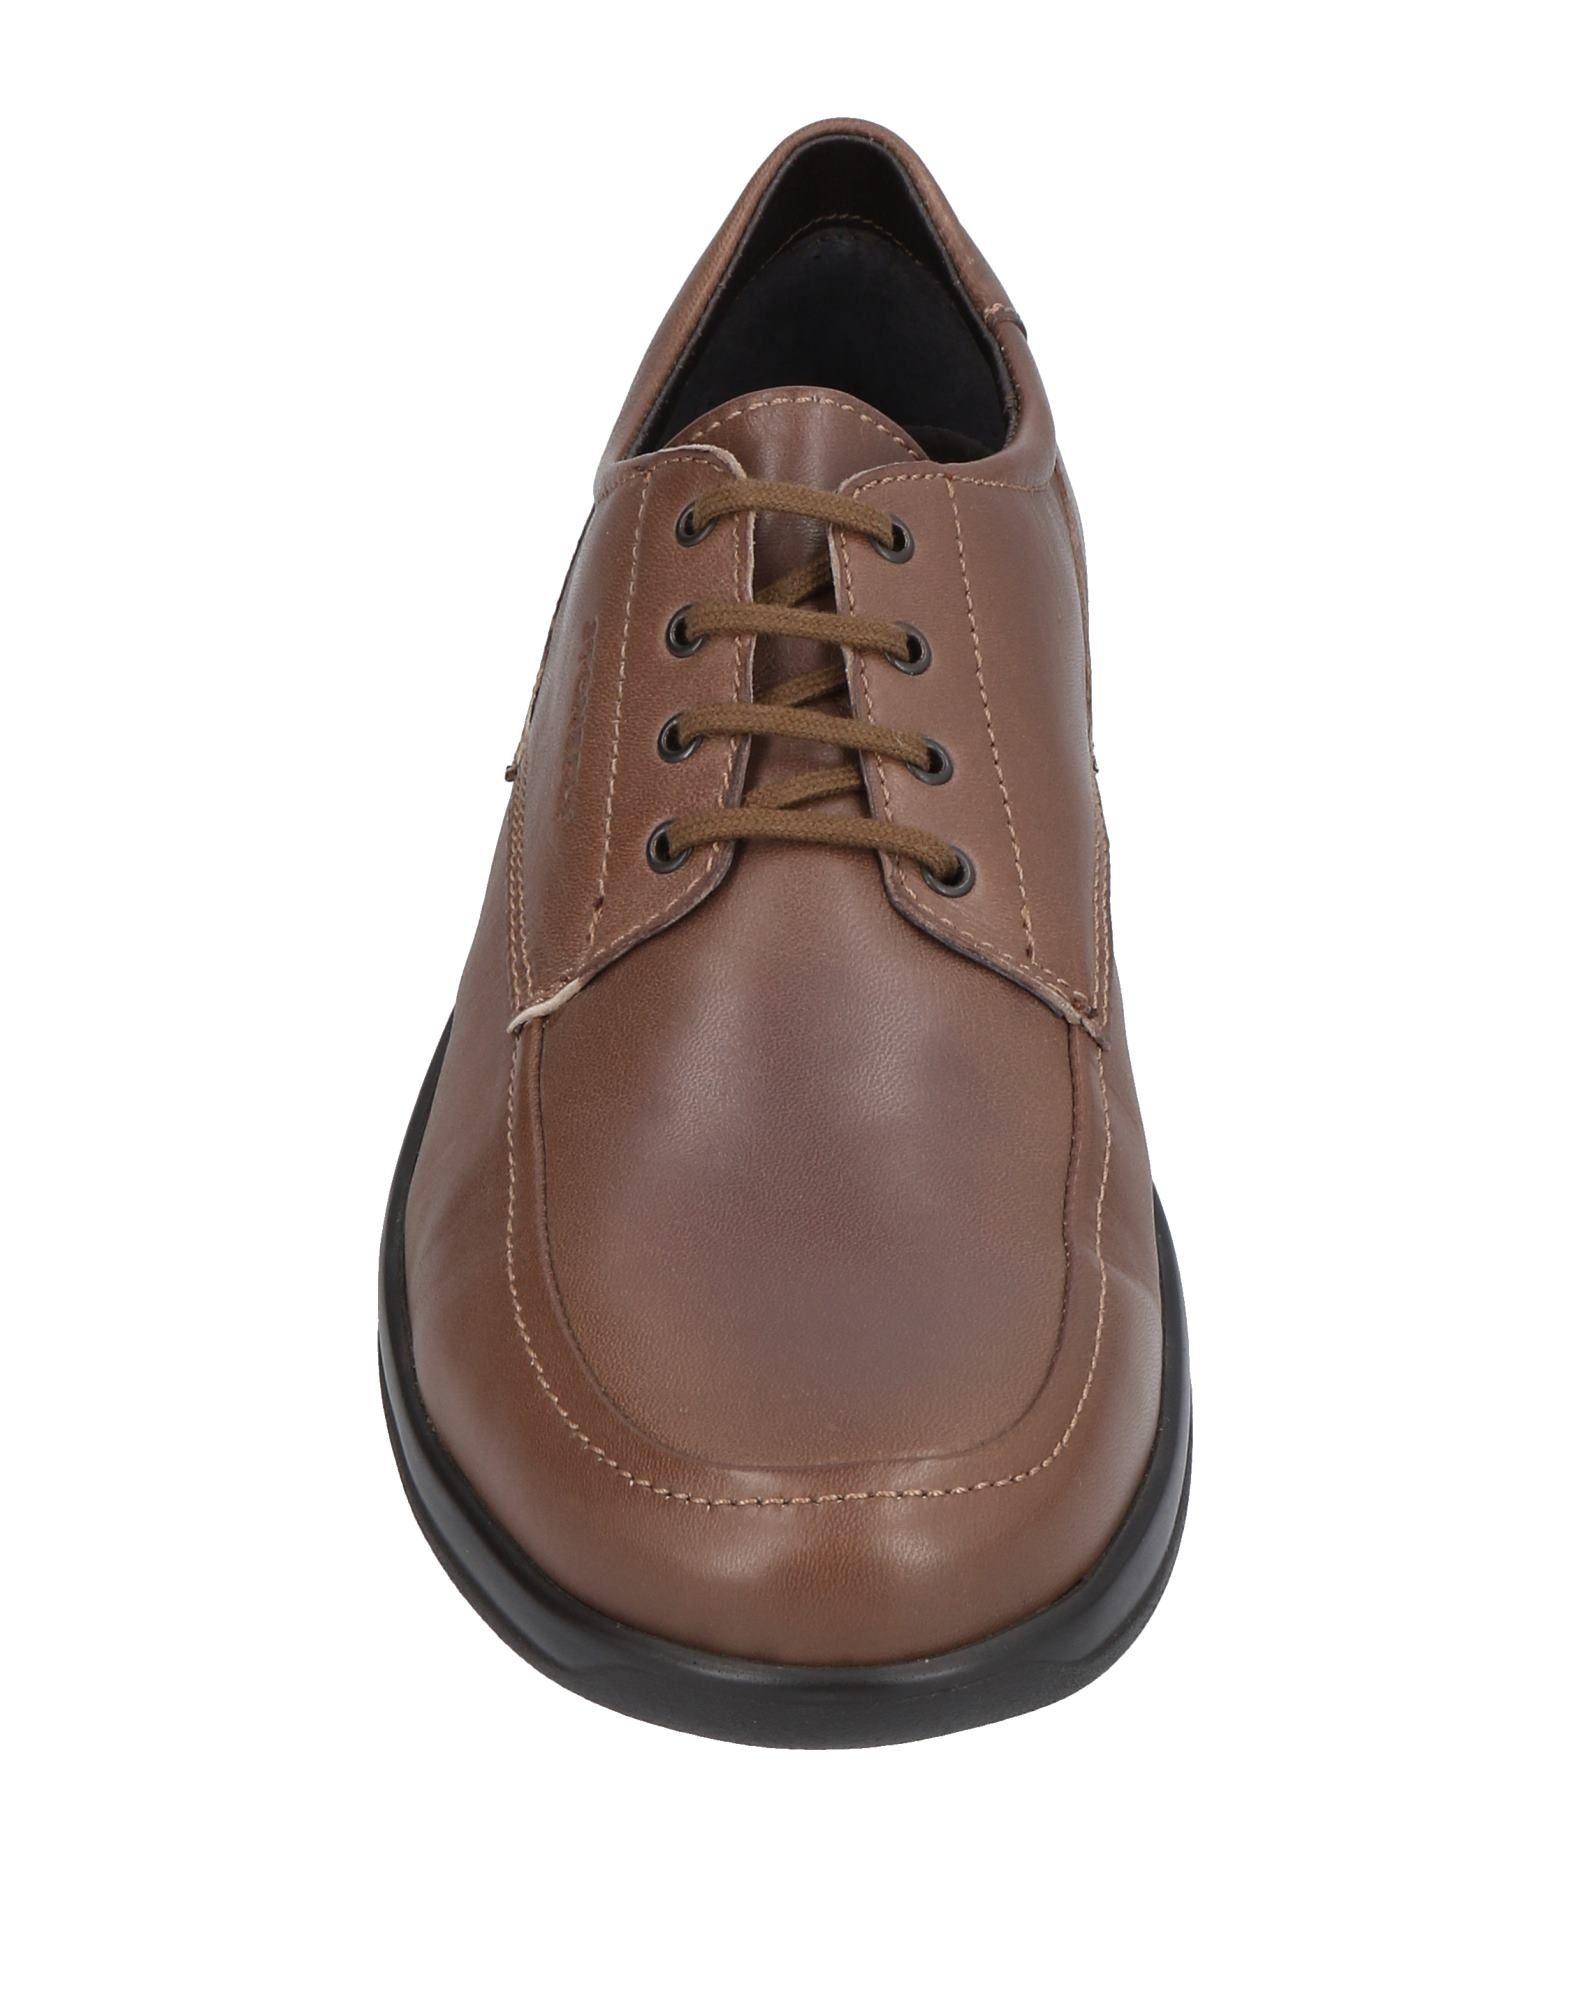 Stonefly Leather Lace-up Shoe in Brown for Men - Lyst